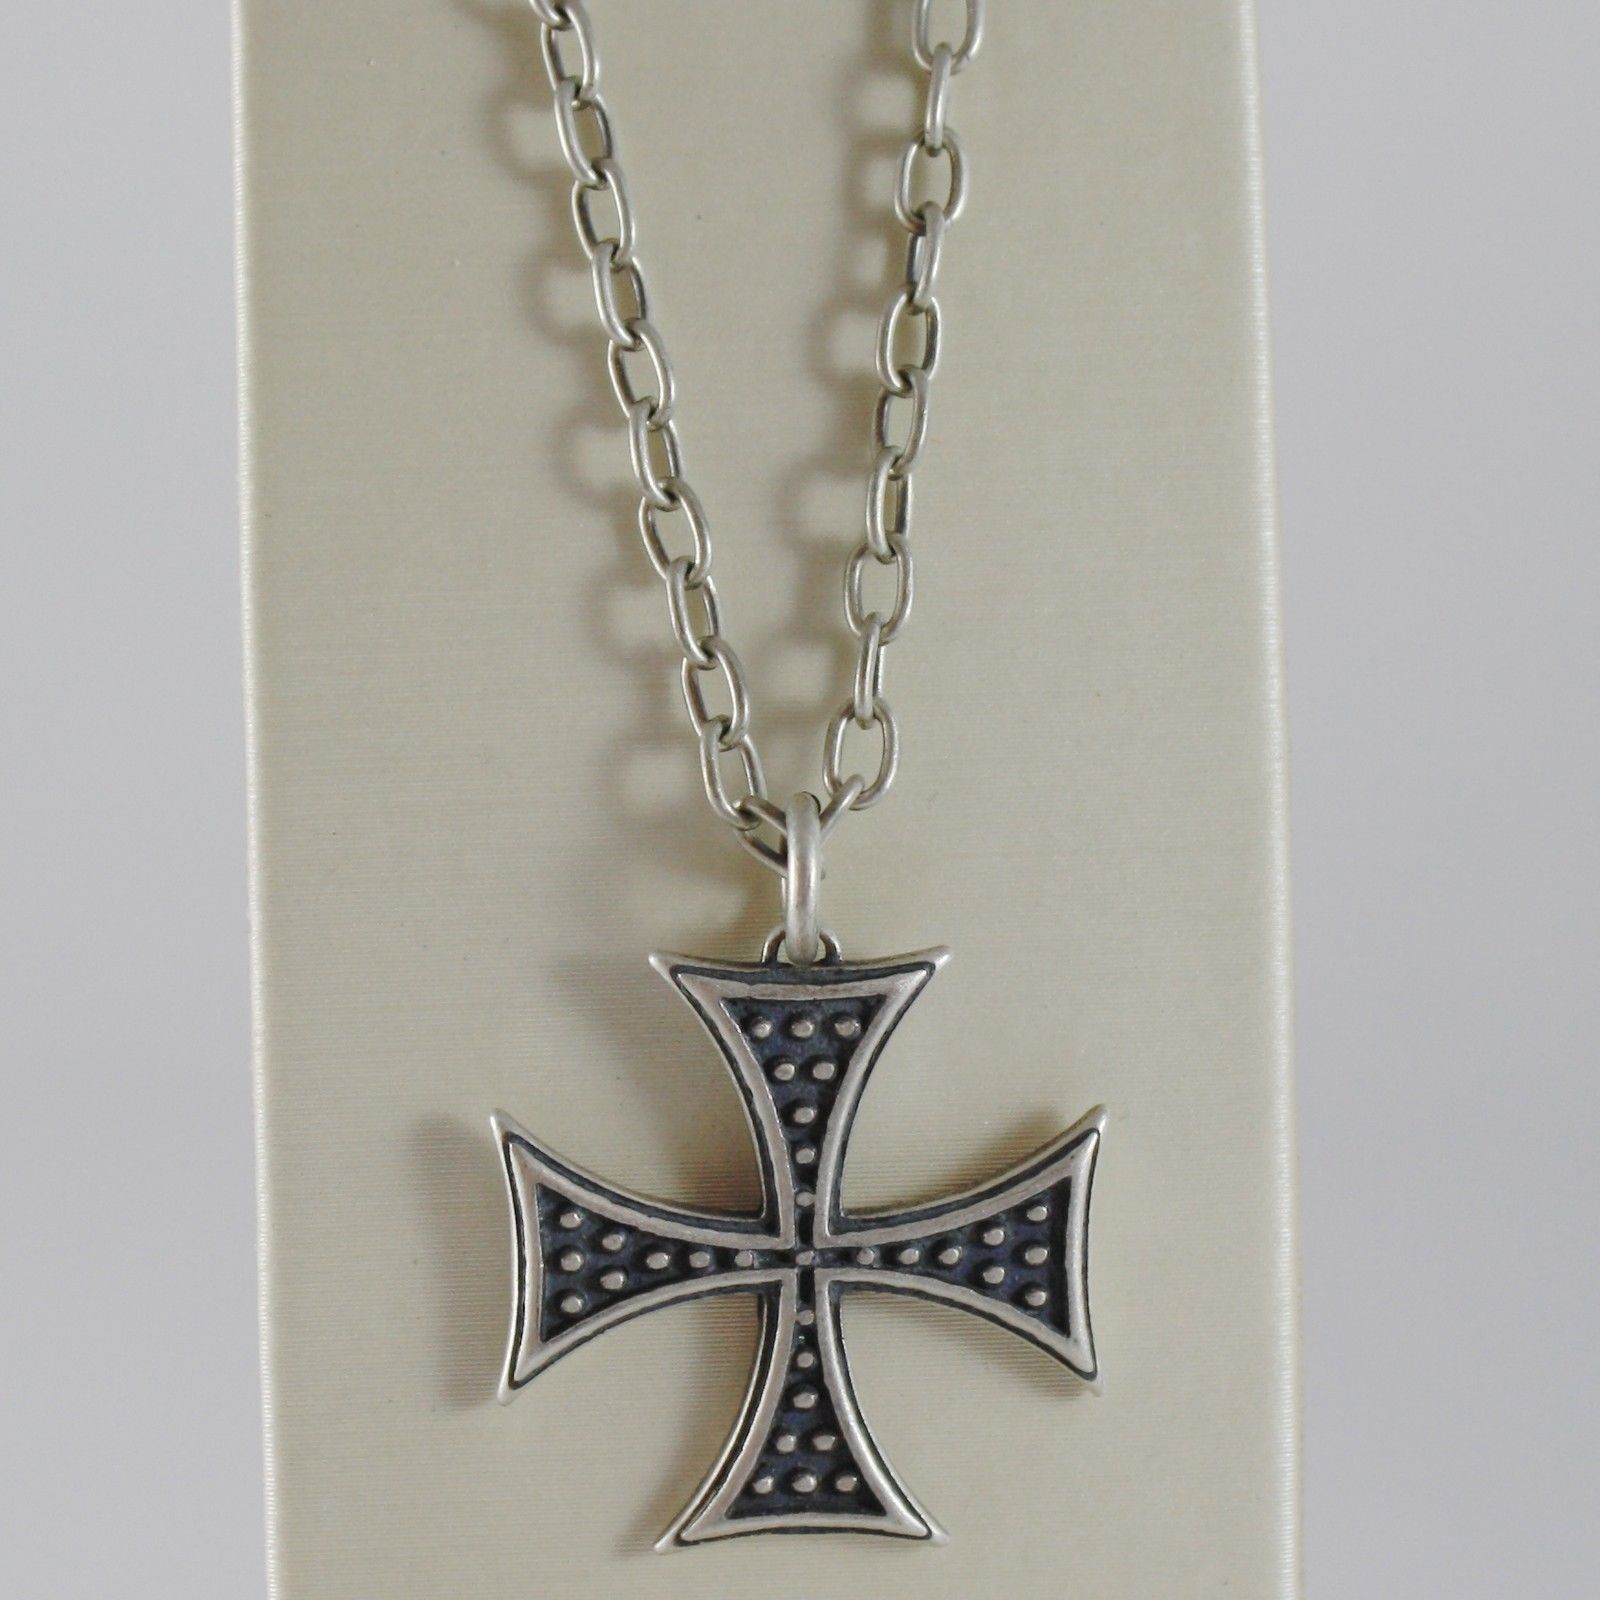 925 BURNISHED SILVER NECKLACE VINTAGE STYLE CROSS PENDANT & CHAIN MADE IN ITALY - $69.30